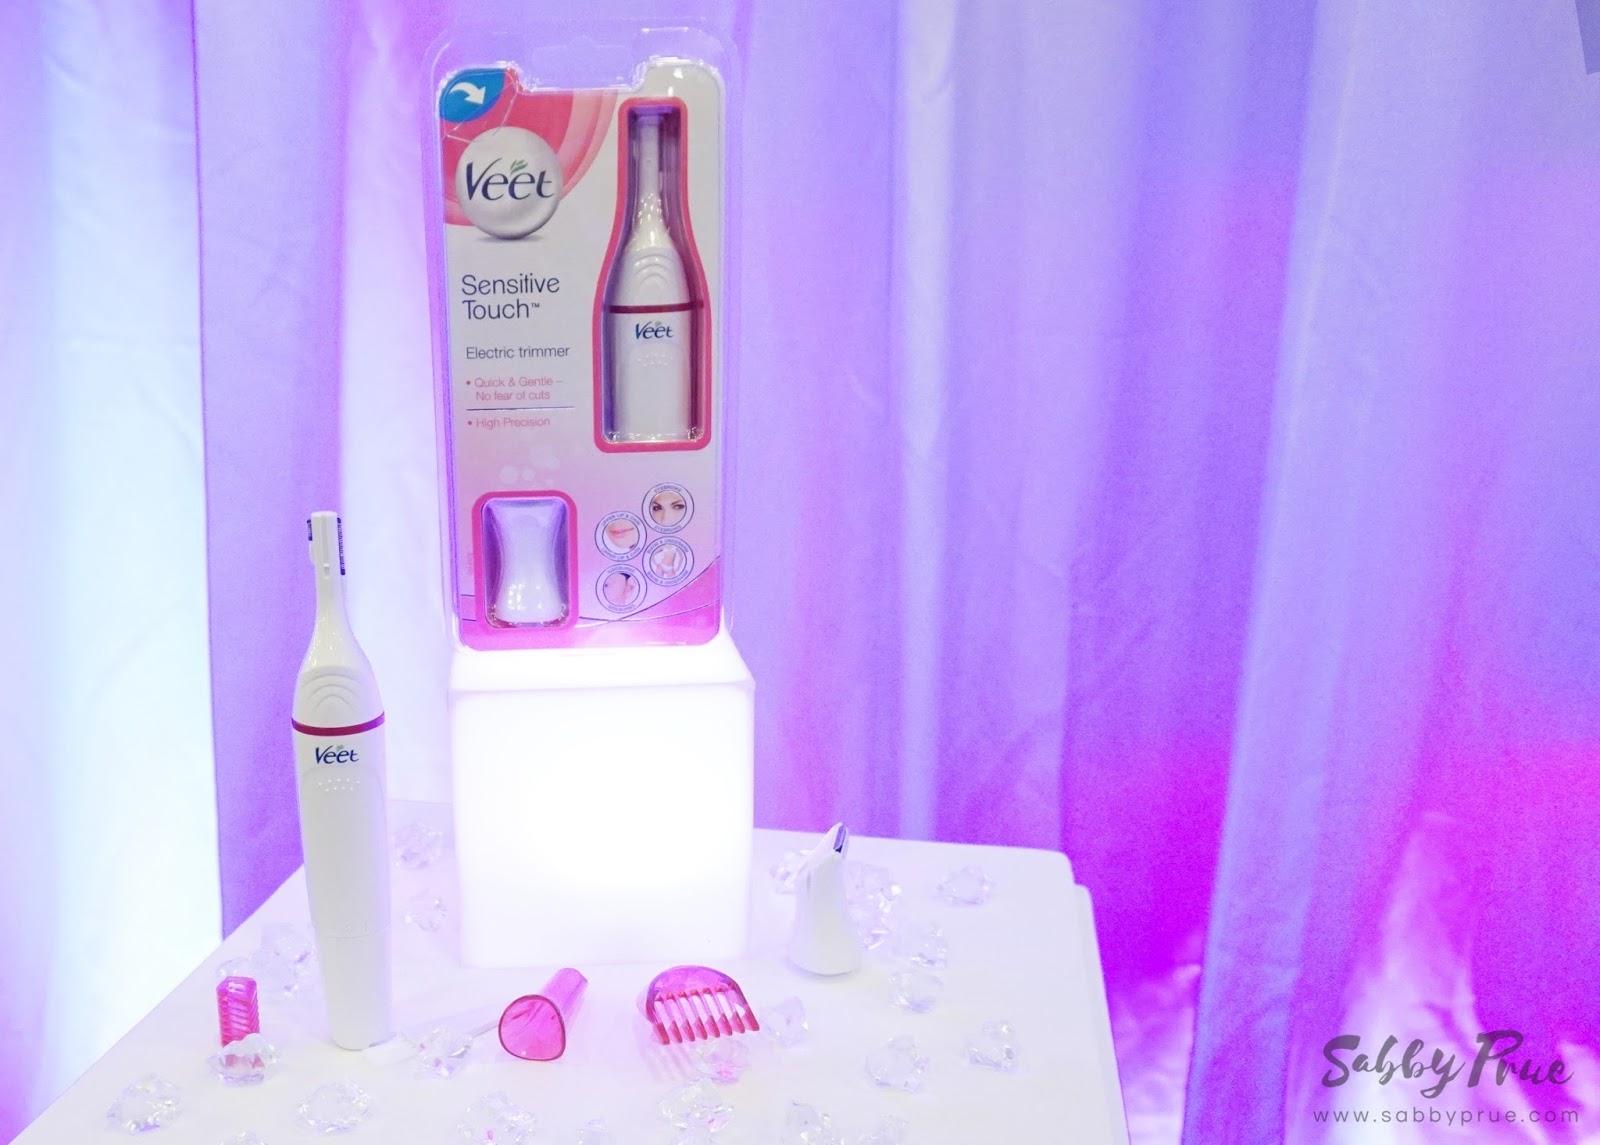 BEAUTY | Review : Veet Sensitive Touch Electric Trimmer - ♥ Sabby Prue :  Malaysian Beauty & Lifestyle Blogger ♥